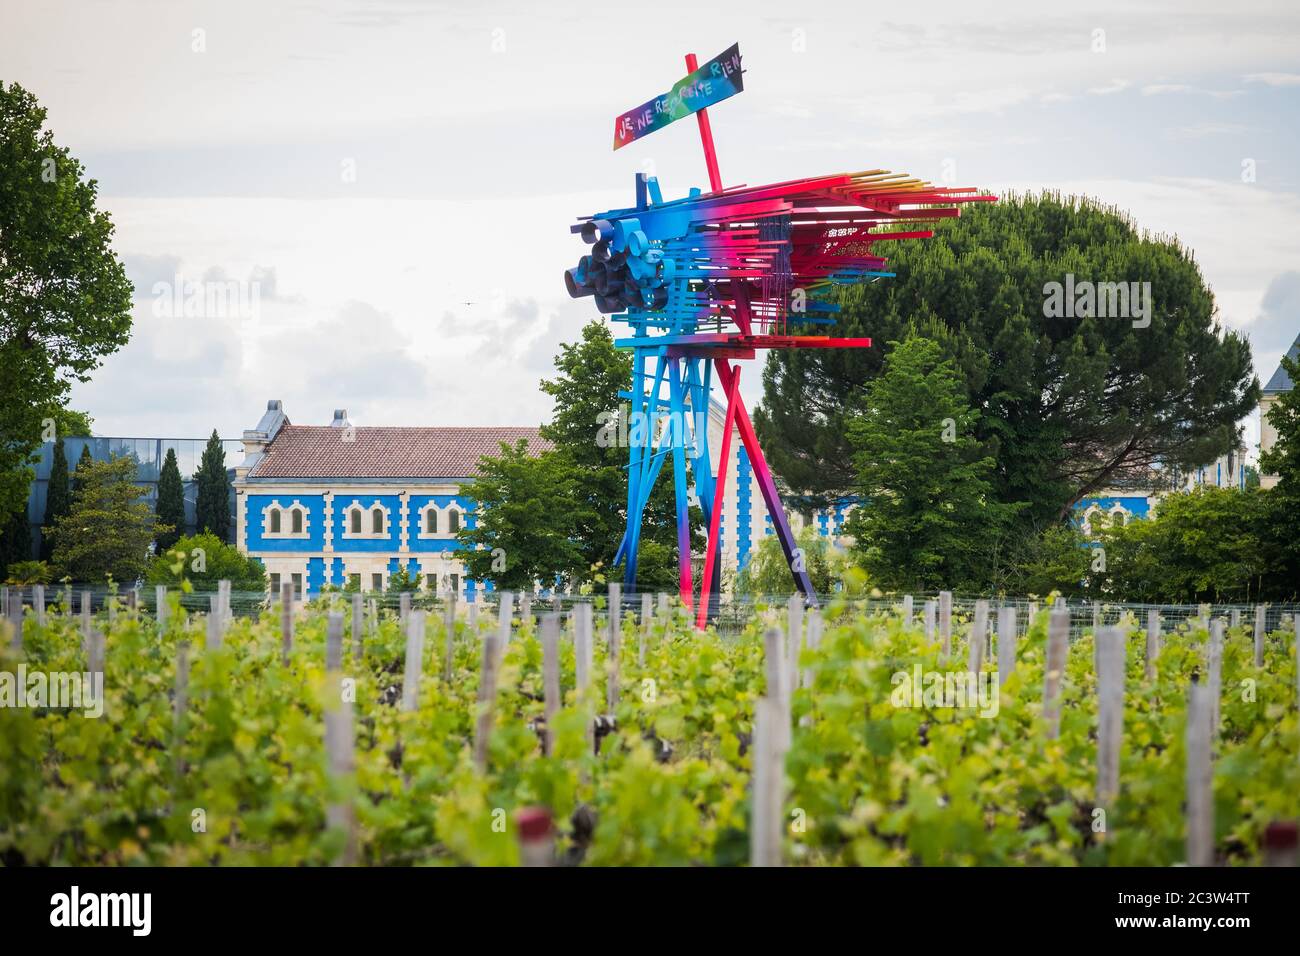 Chateau d’Arsac wine-growing property (south-western France): 'Stilthouse', sculpture by artist Arne Quinze Stock Photo